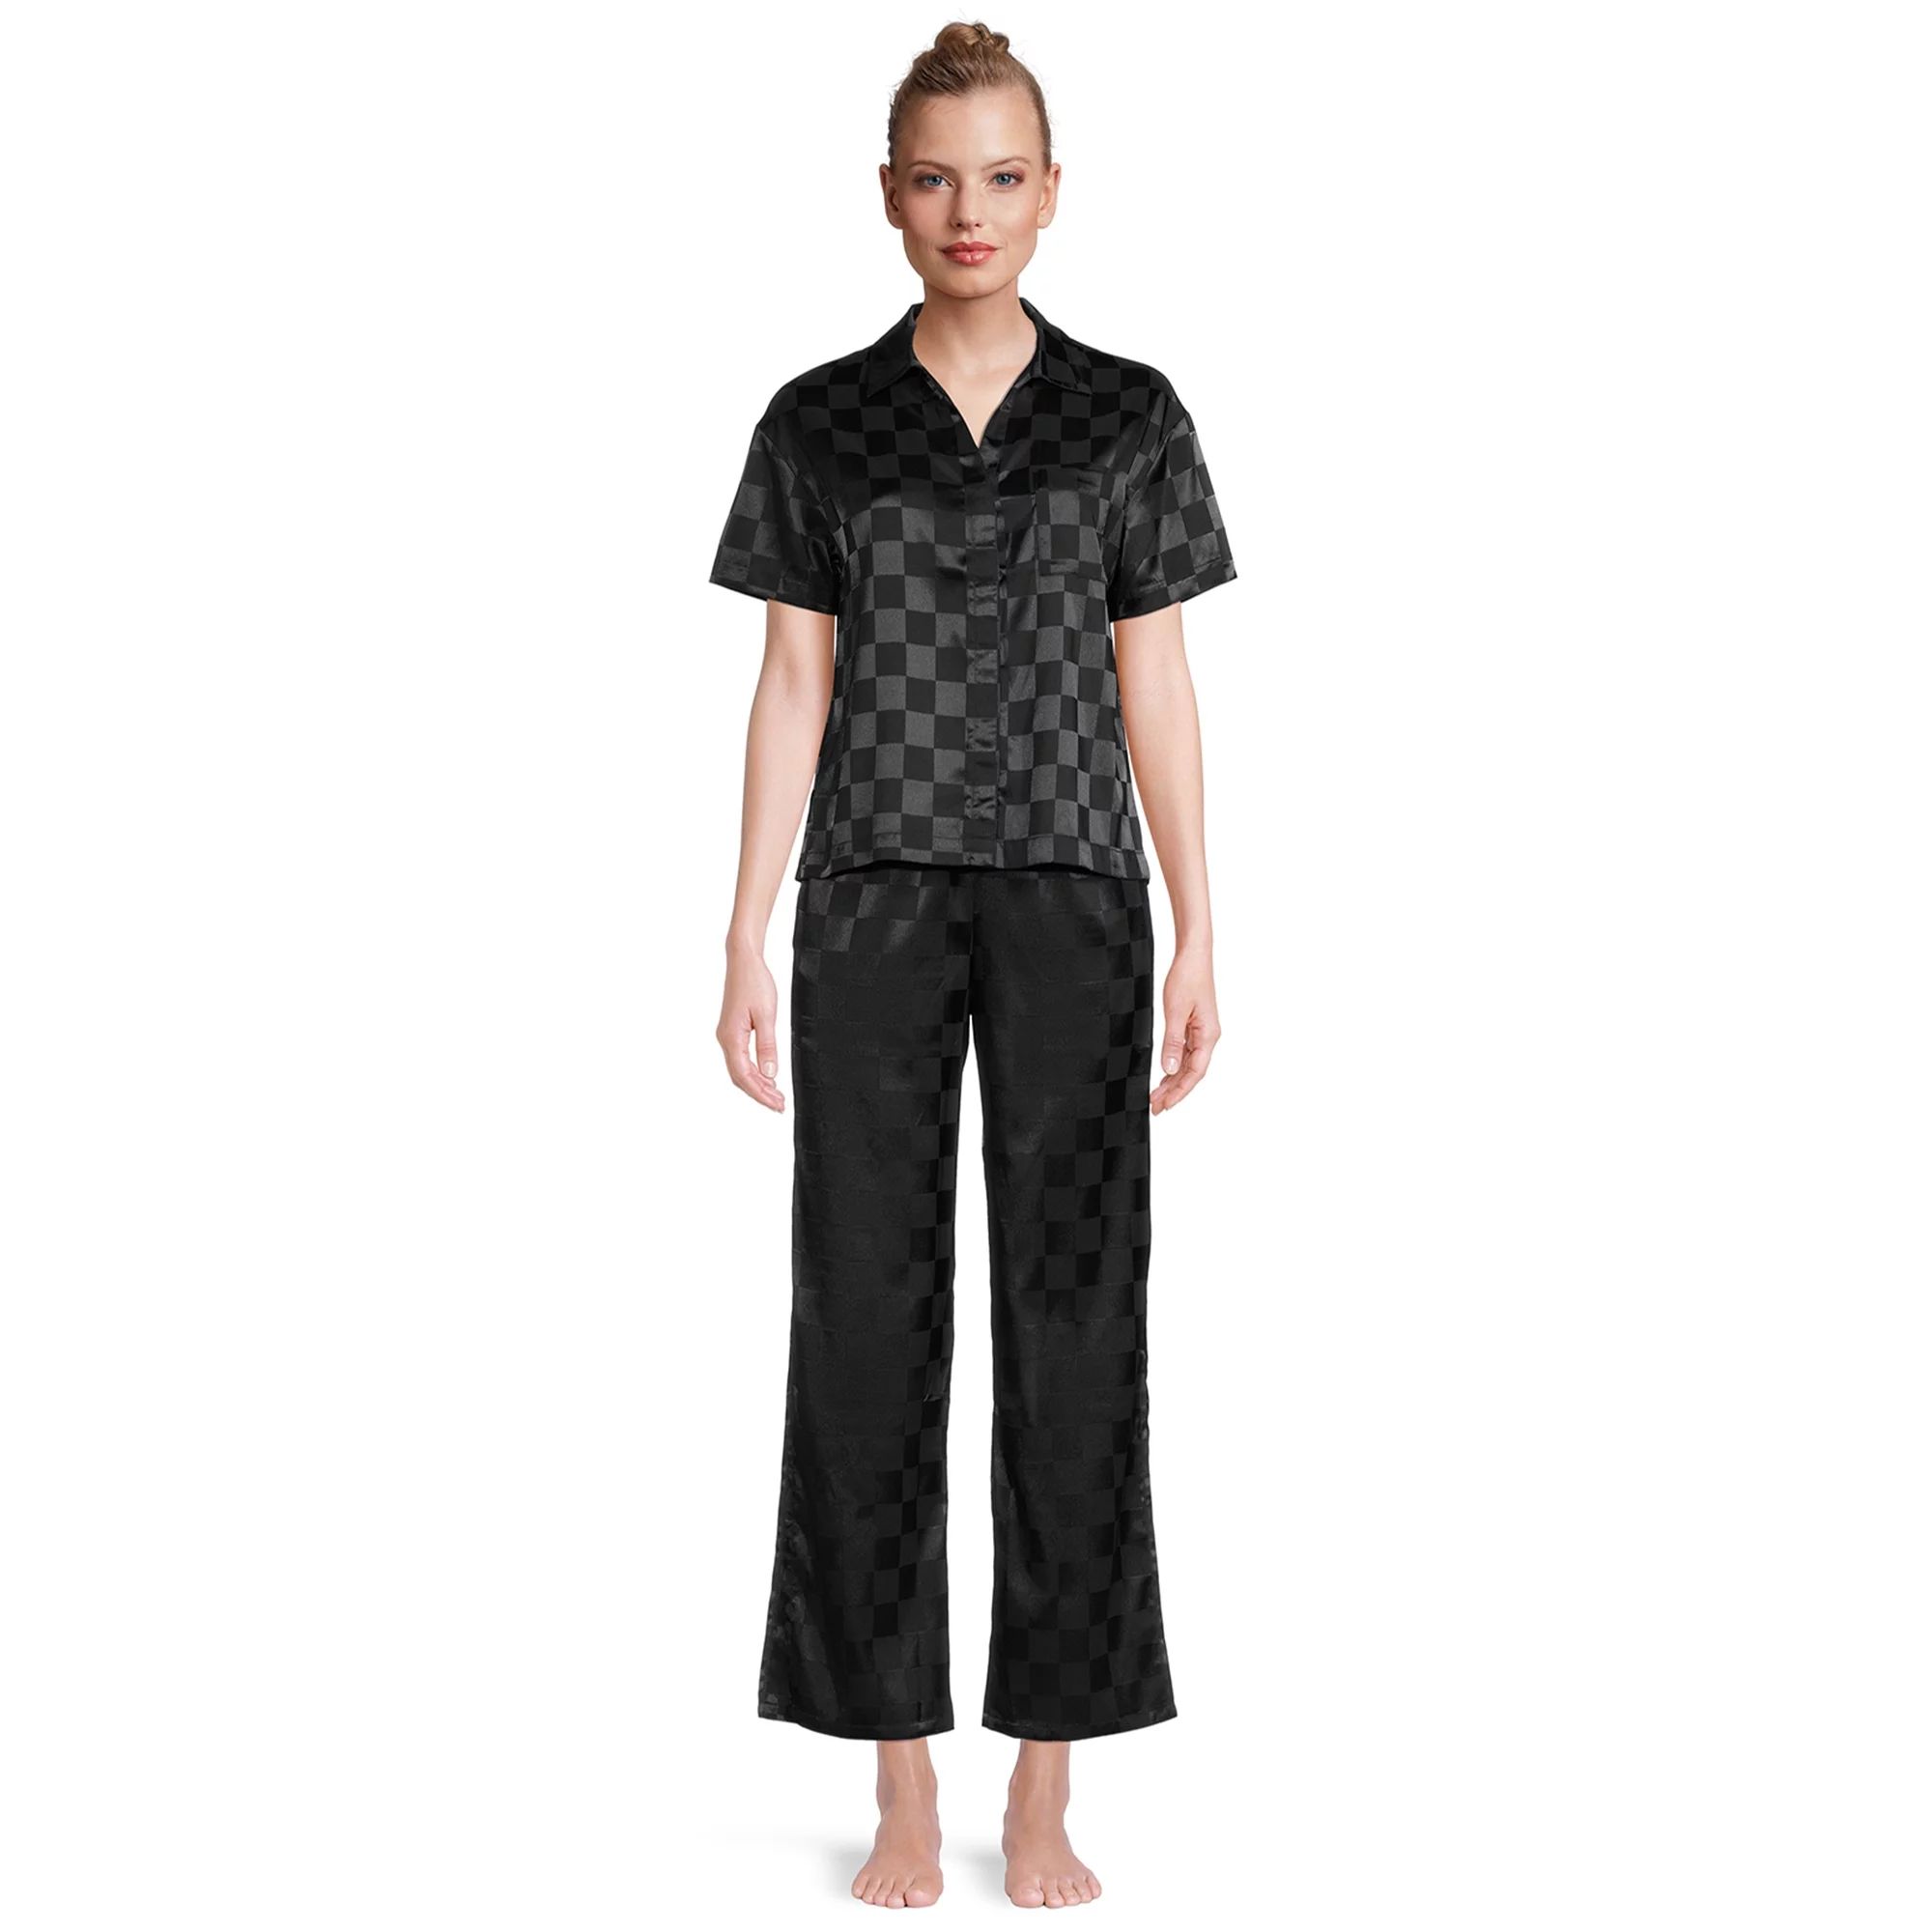 Lissome Women's and Women's Plus Satin Checkered Boxy Crop Top and Pants Sleep Set, 2-Piece | Walmart (US)